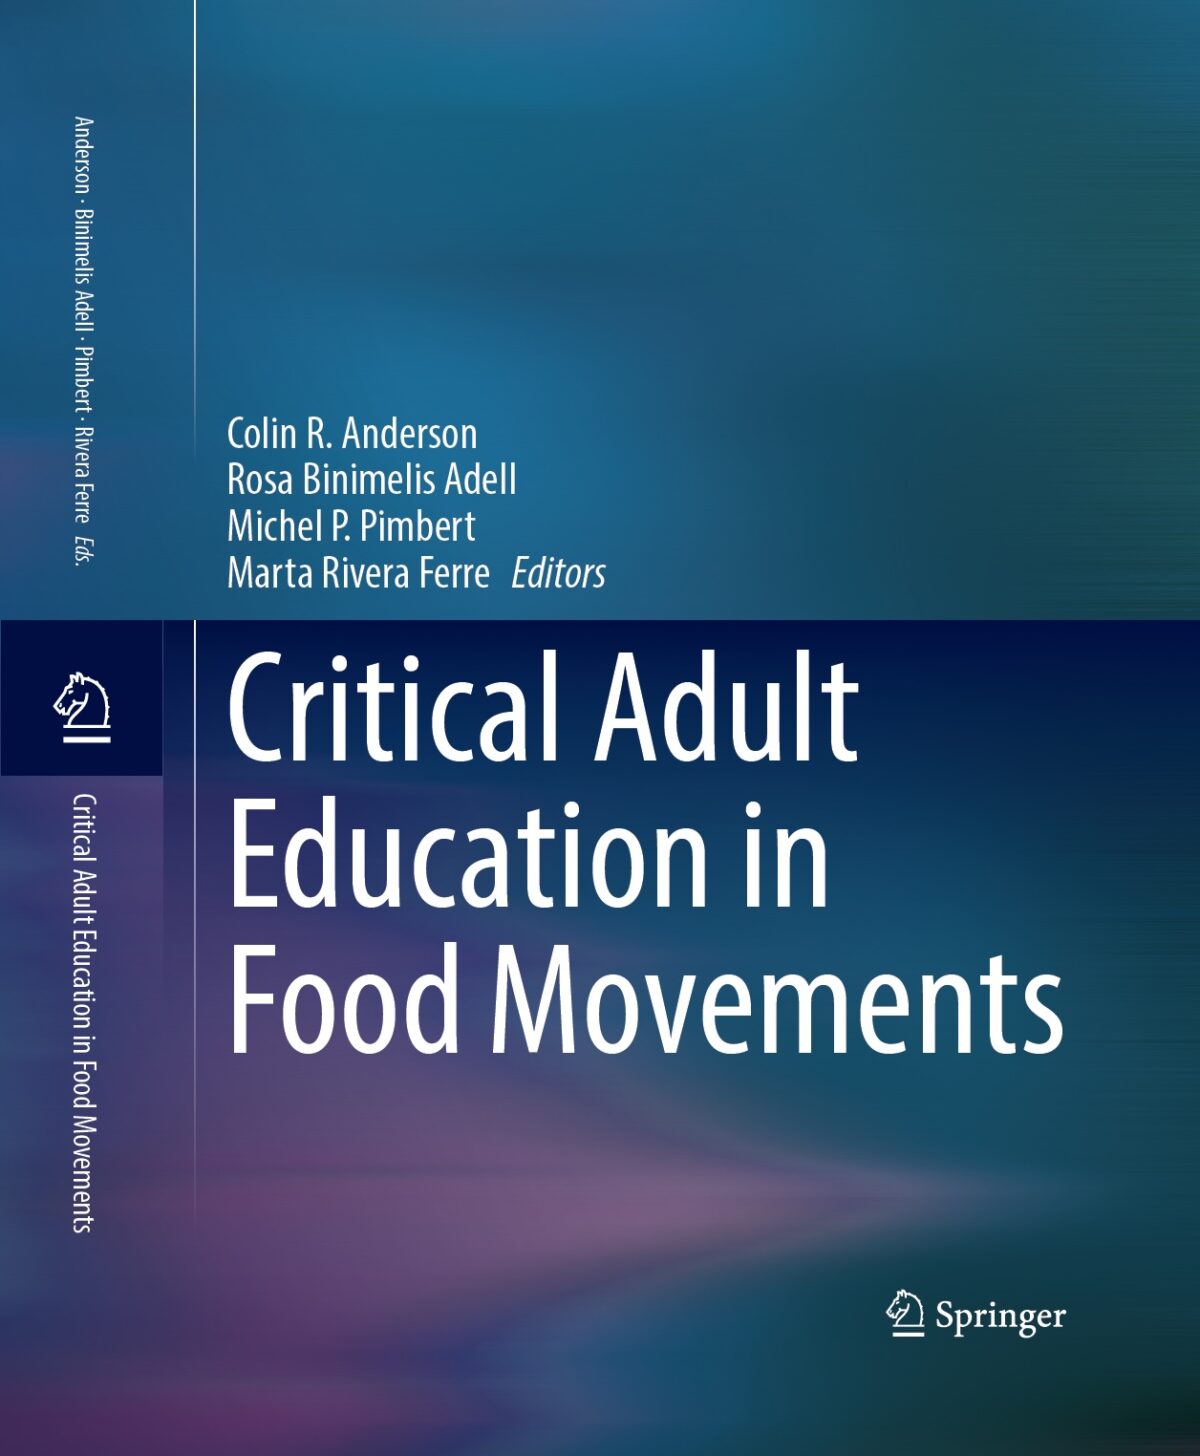 New Edited Book: Critical Adult Education in Food Movements